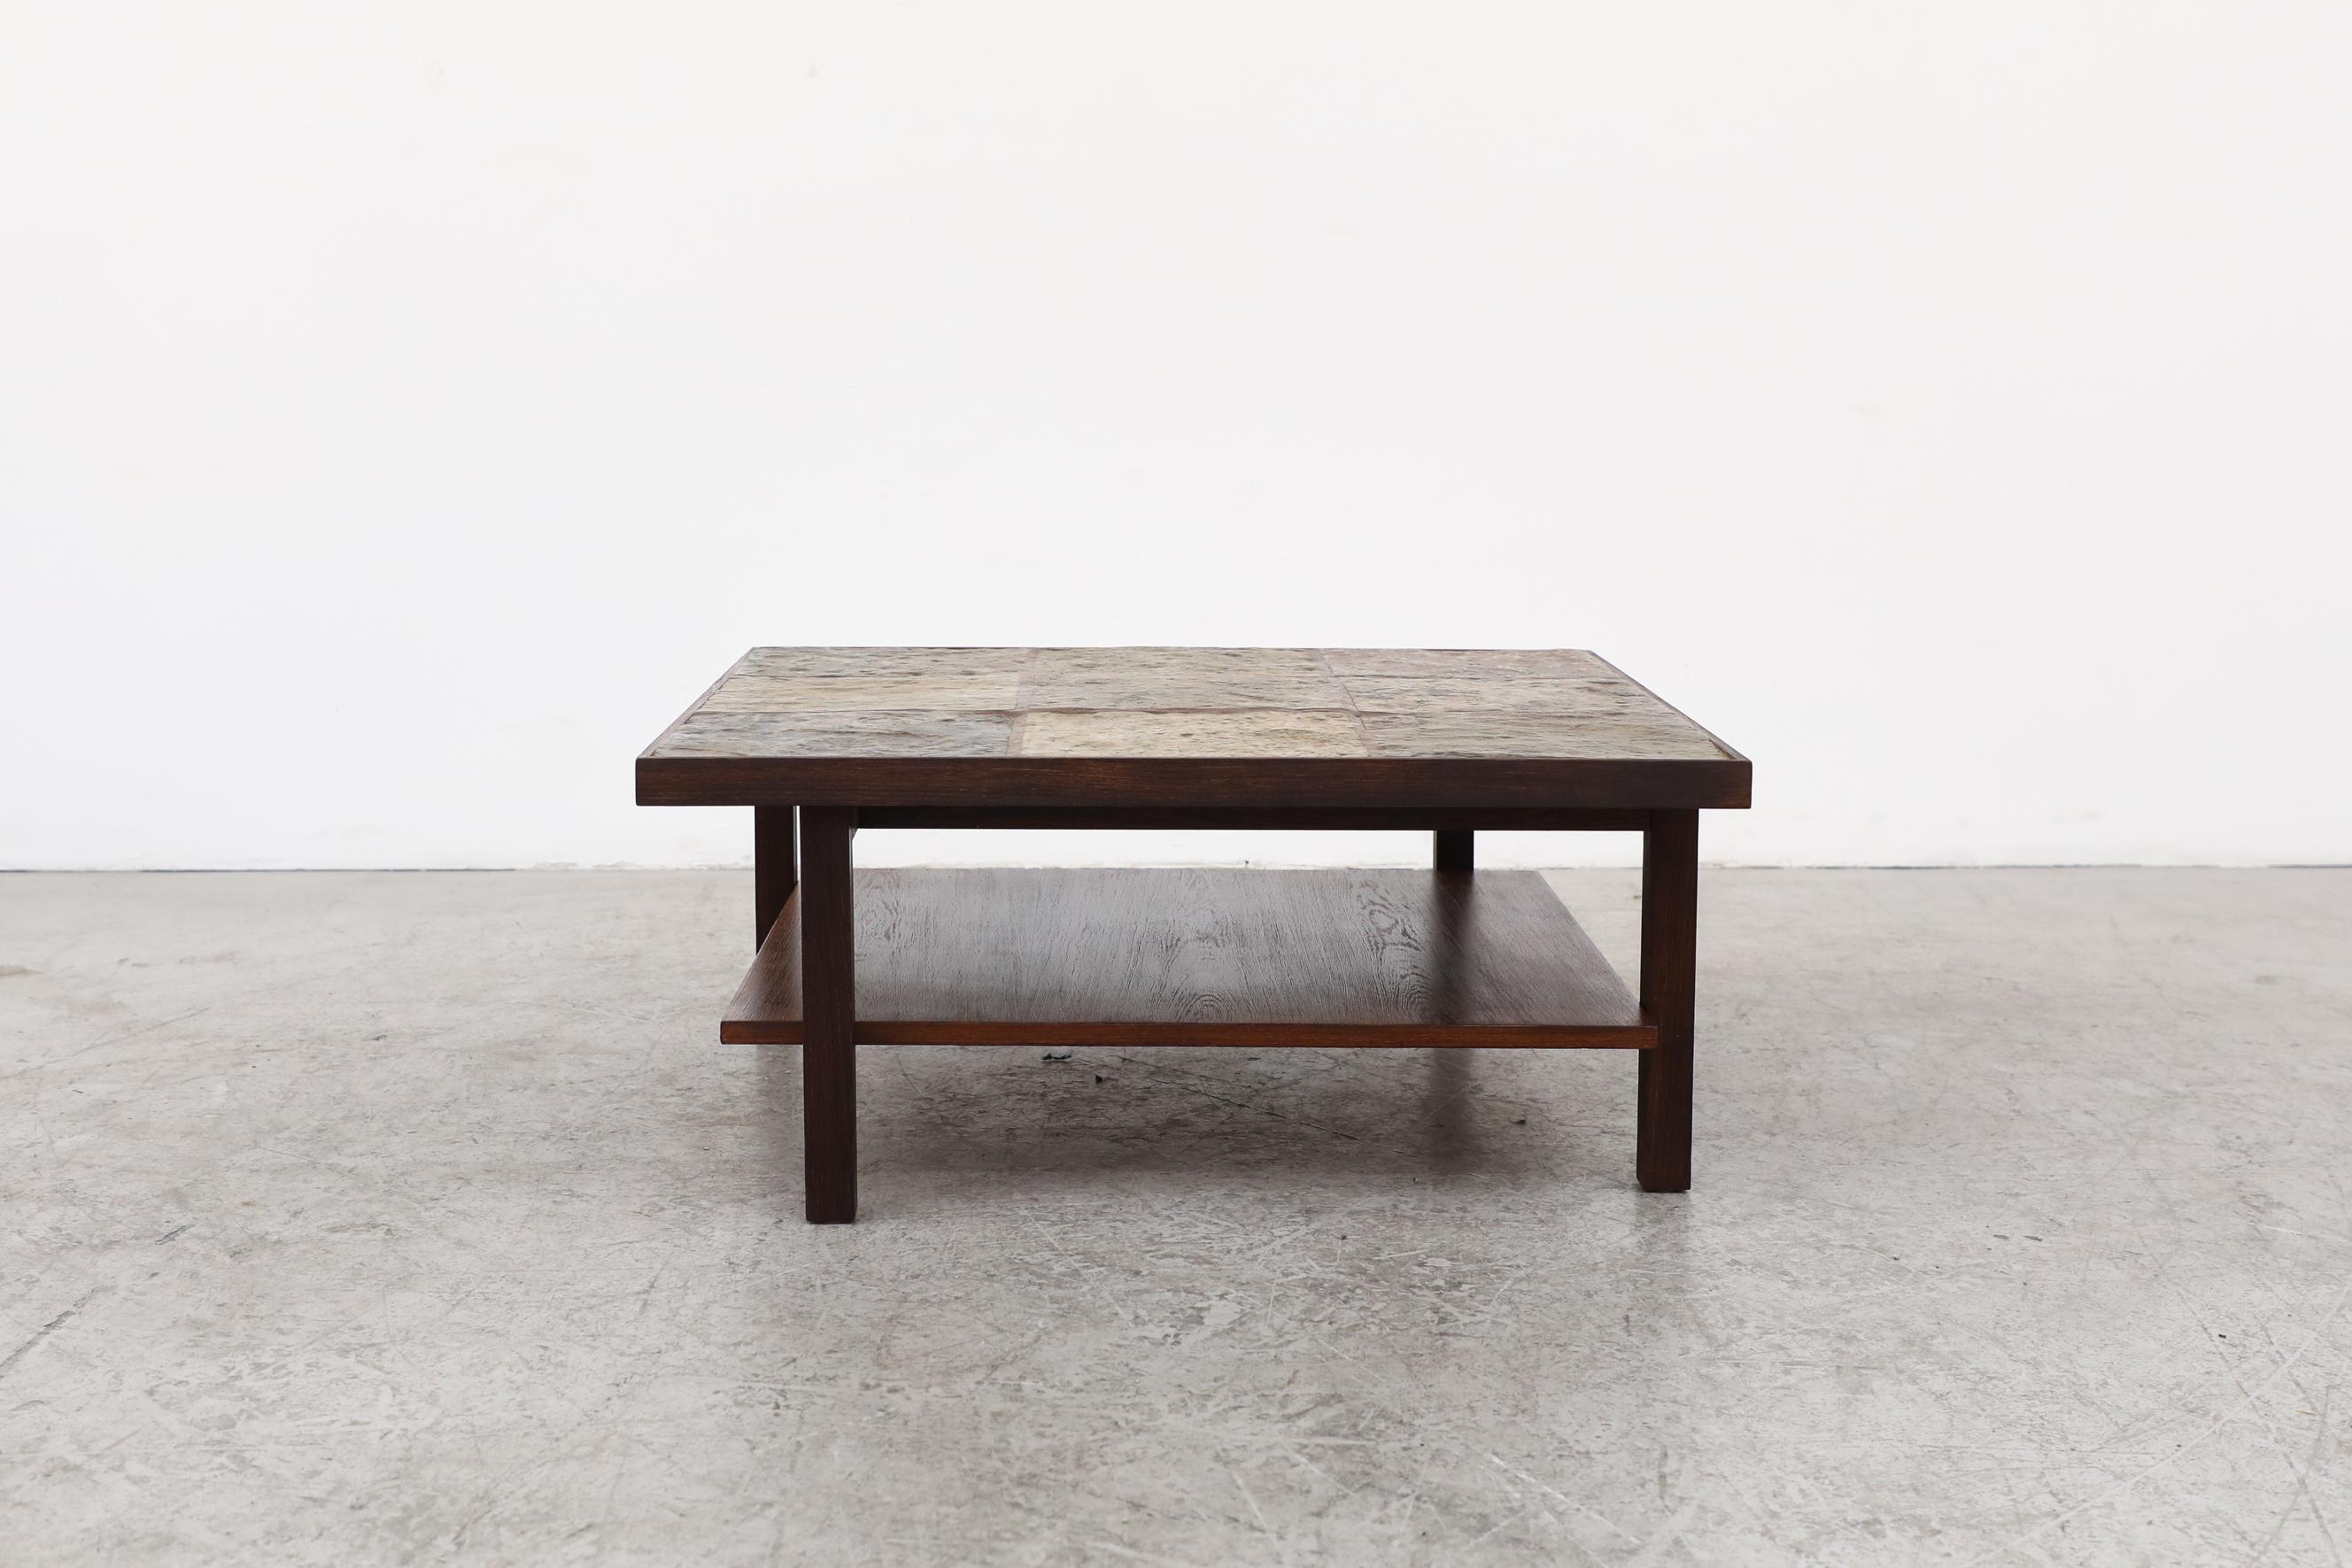 Dutch Mid-Century Modern Brutalist Wood Framed Stone Topped Coffee Table with Shelf For Sale